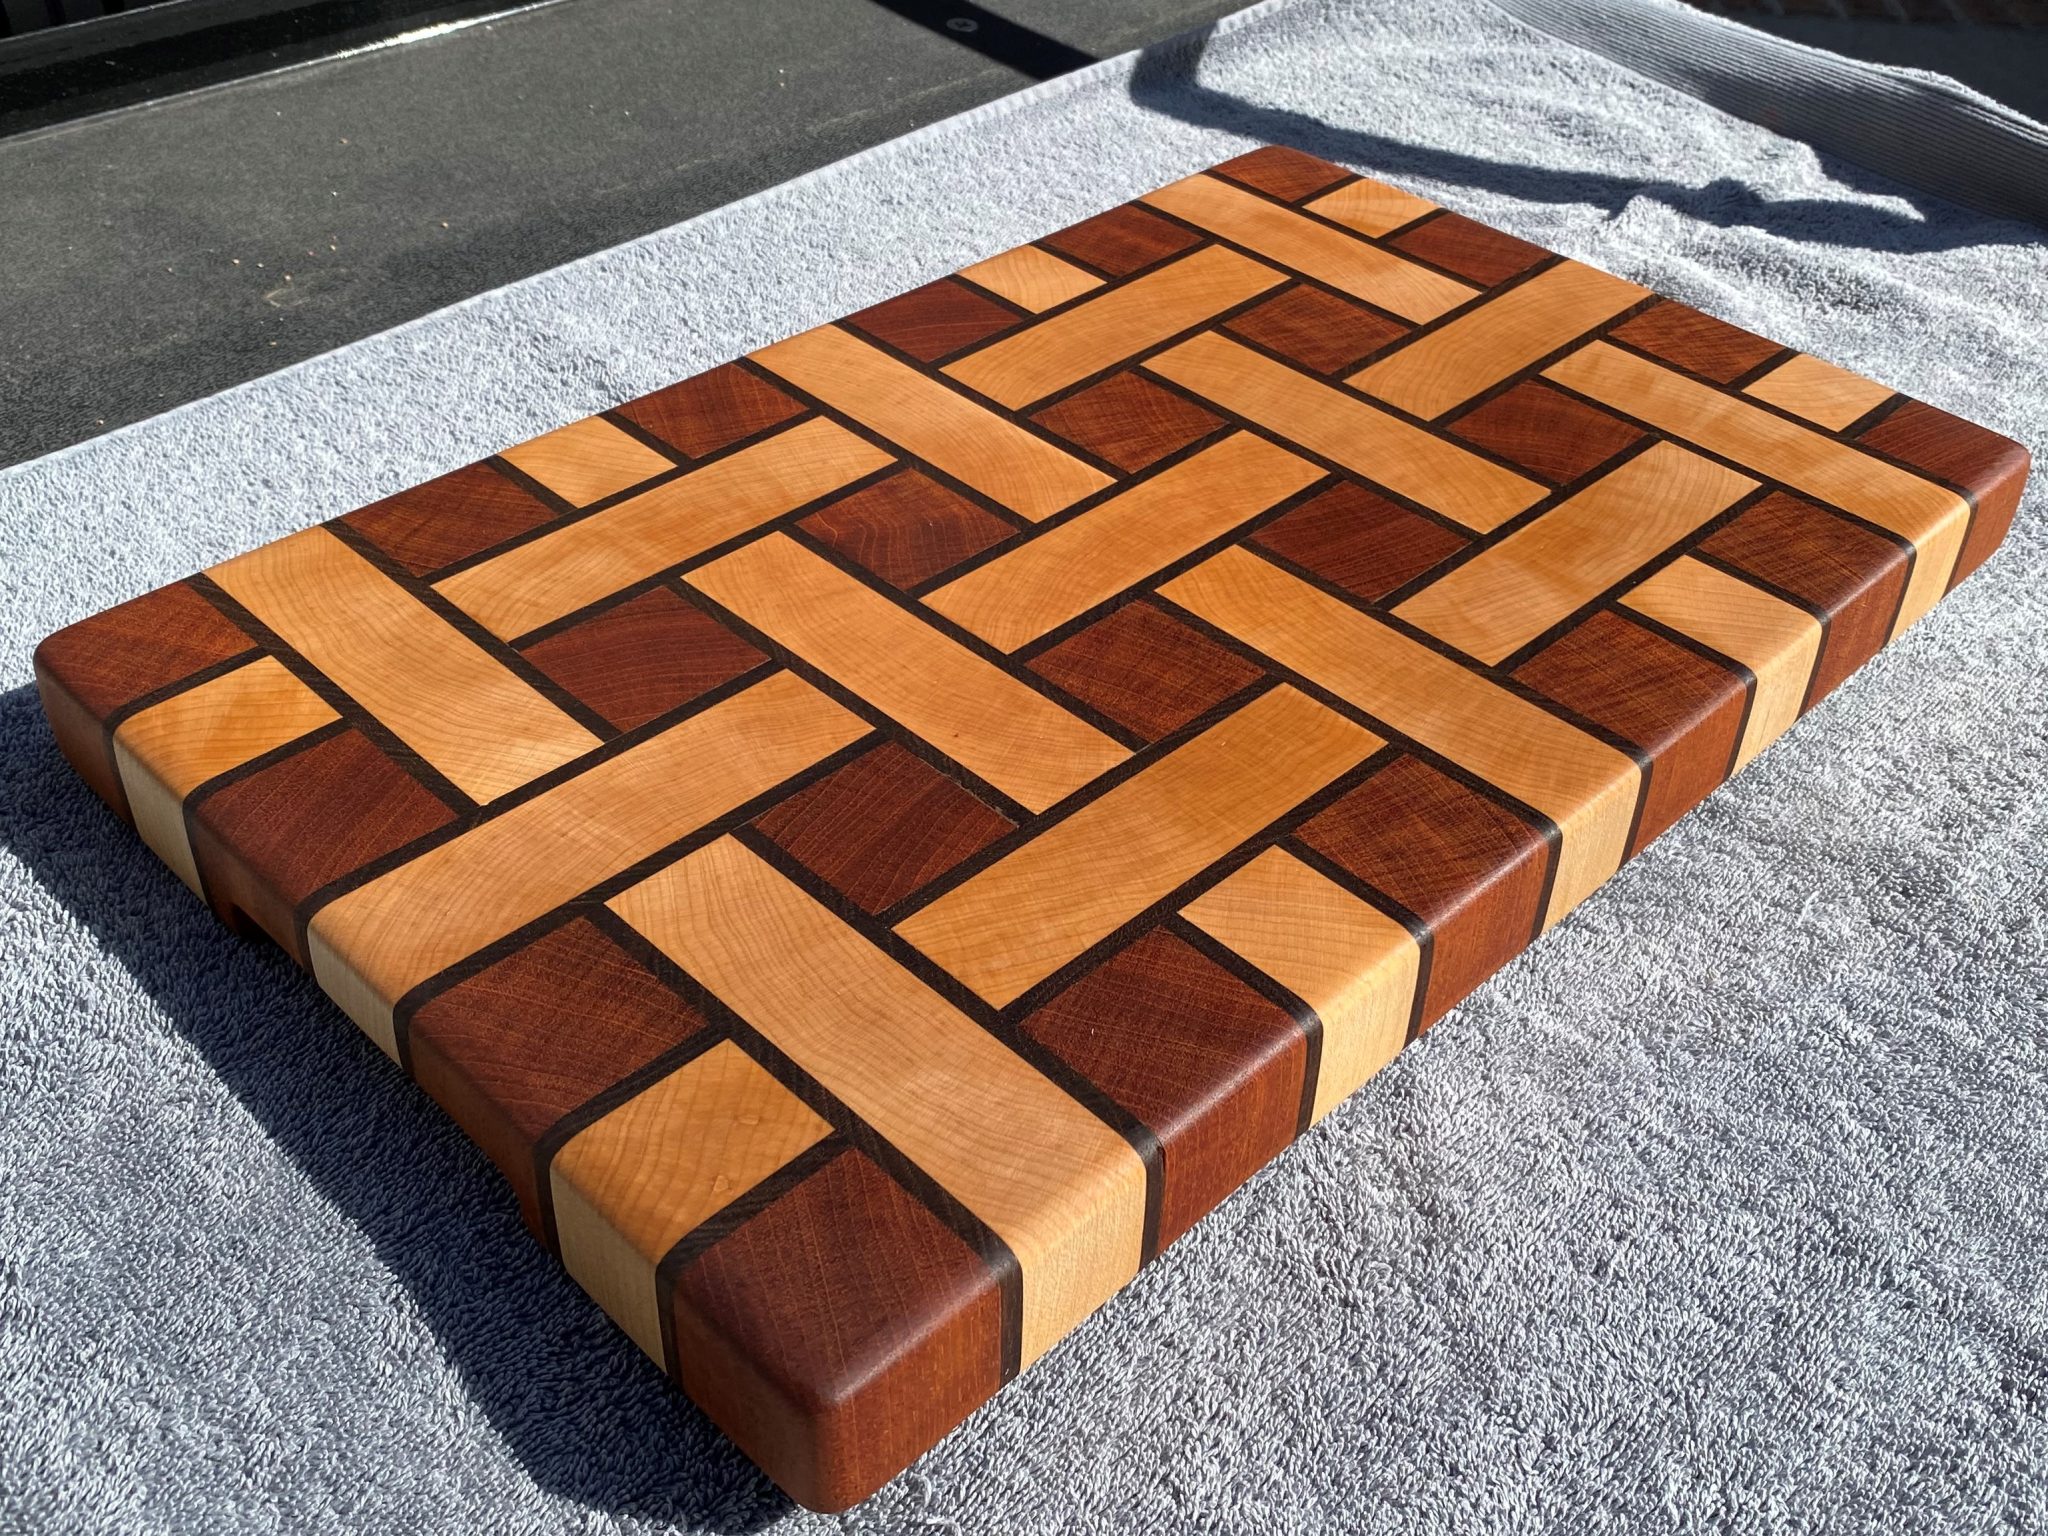 End Grain Cutting Board   1 1/2" x 11 1/4" x 17"  Constructed of Hard Maple, Peruvian Walnut, and Mahogany